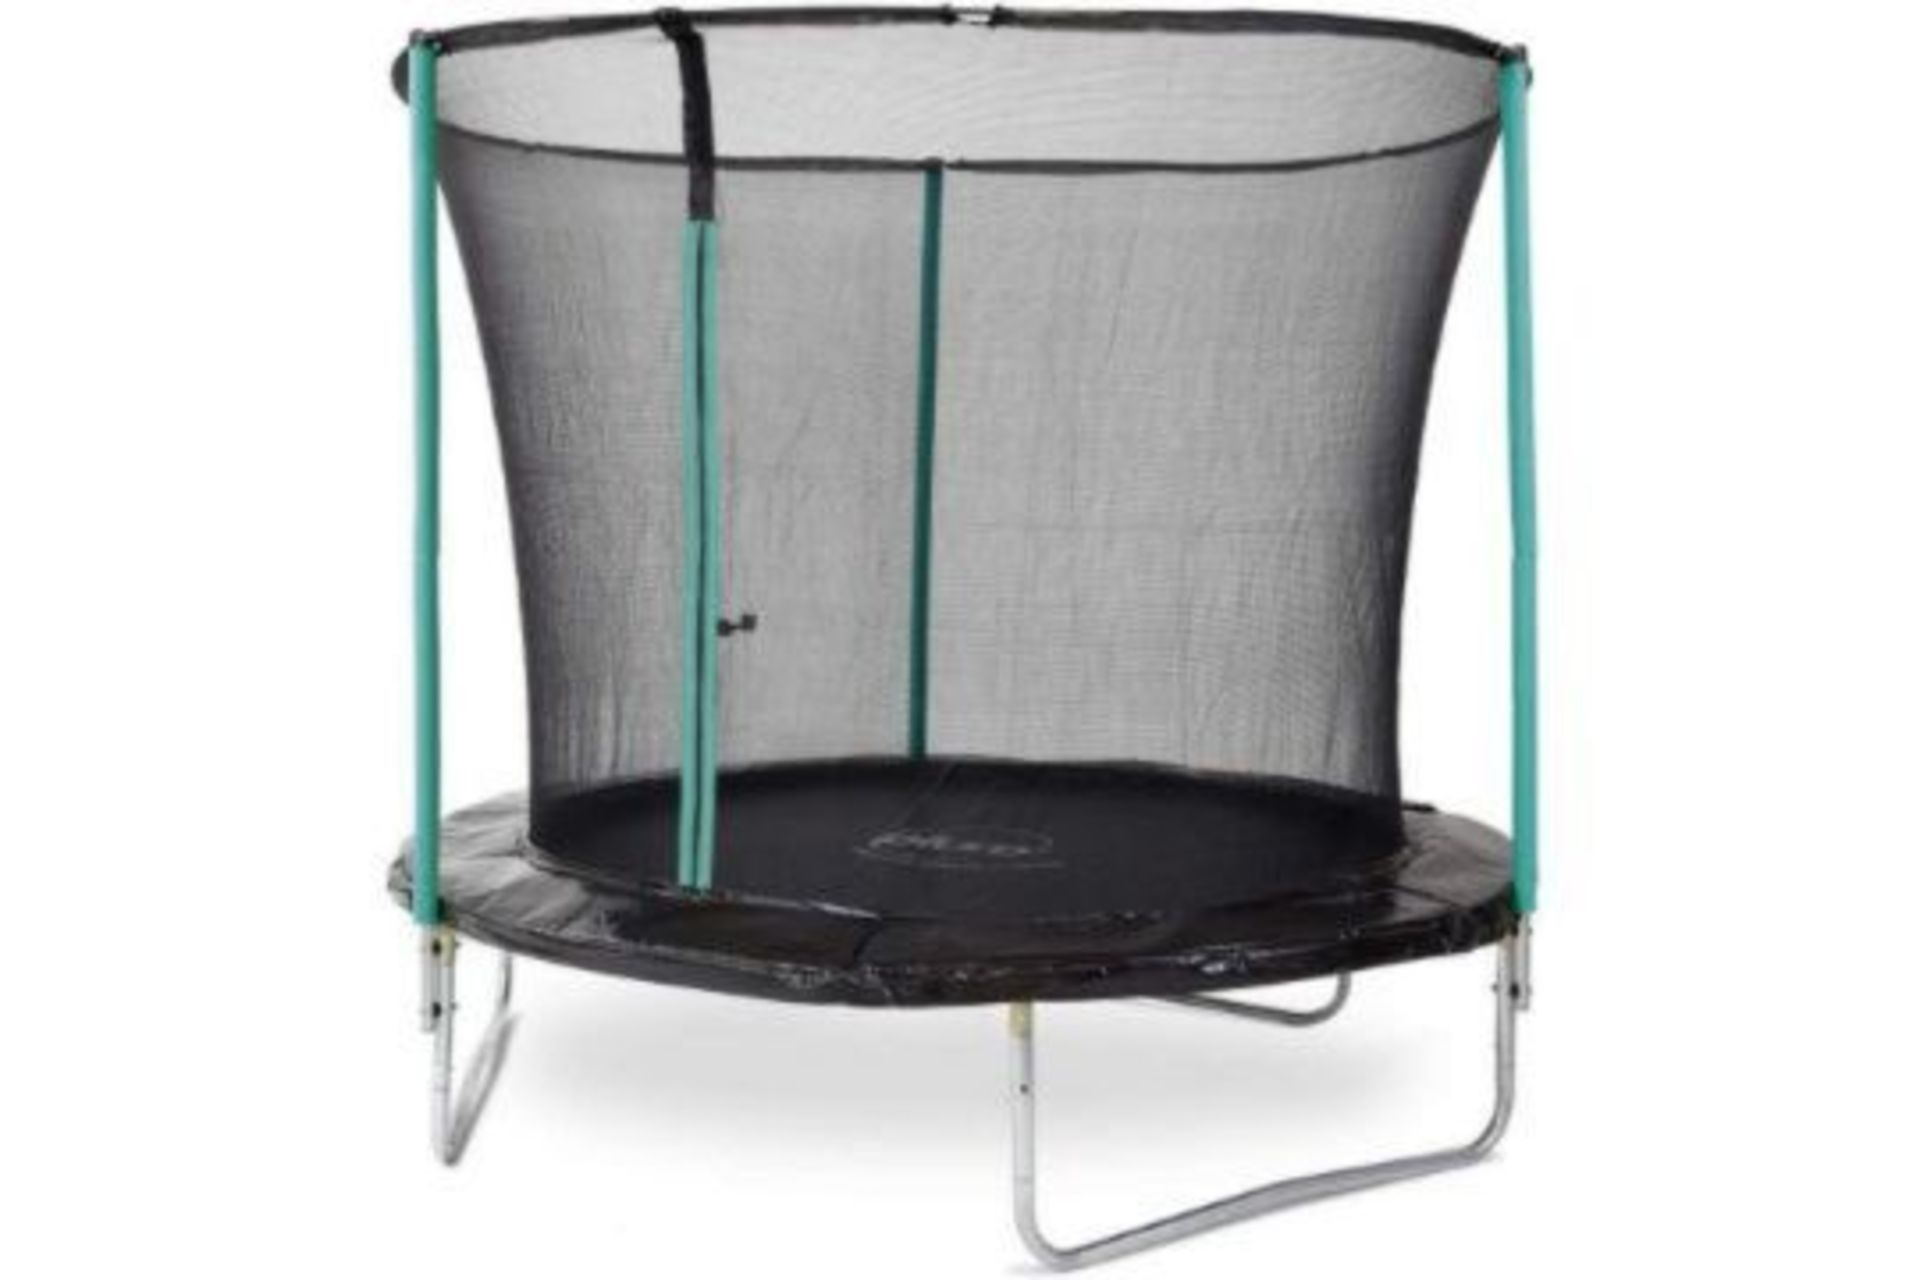 New Boxed Plum 8ft Springsafe Trampoline & Enclosure. The 8ft trampoline with 2G enclosure net